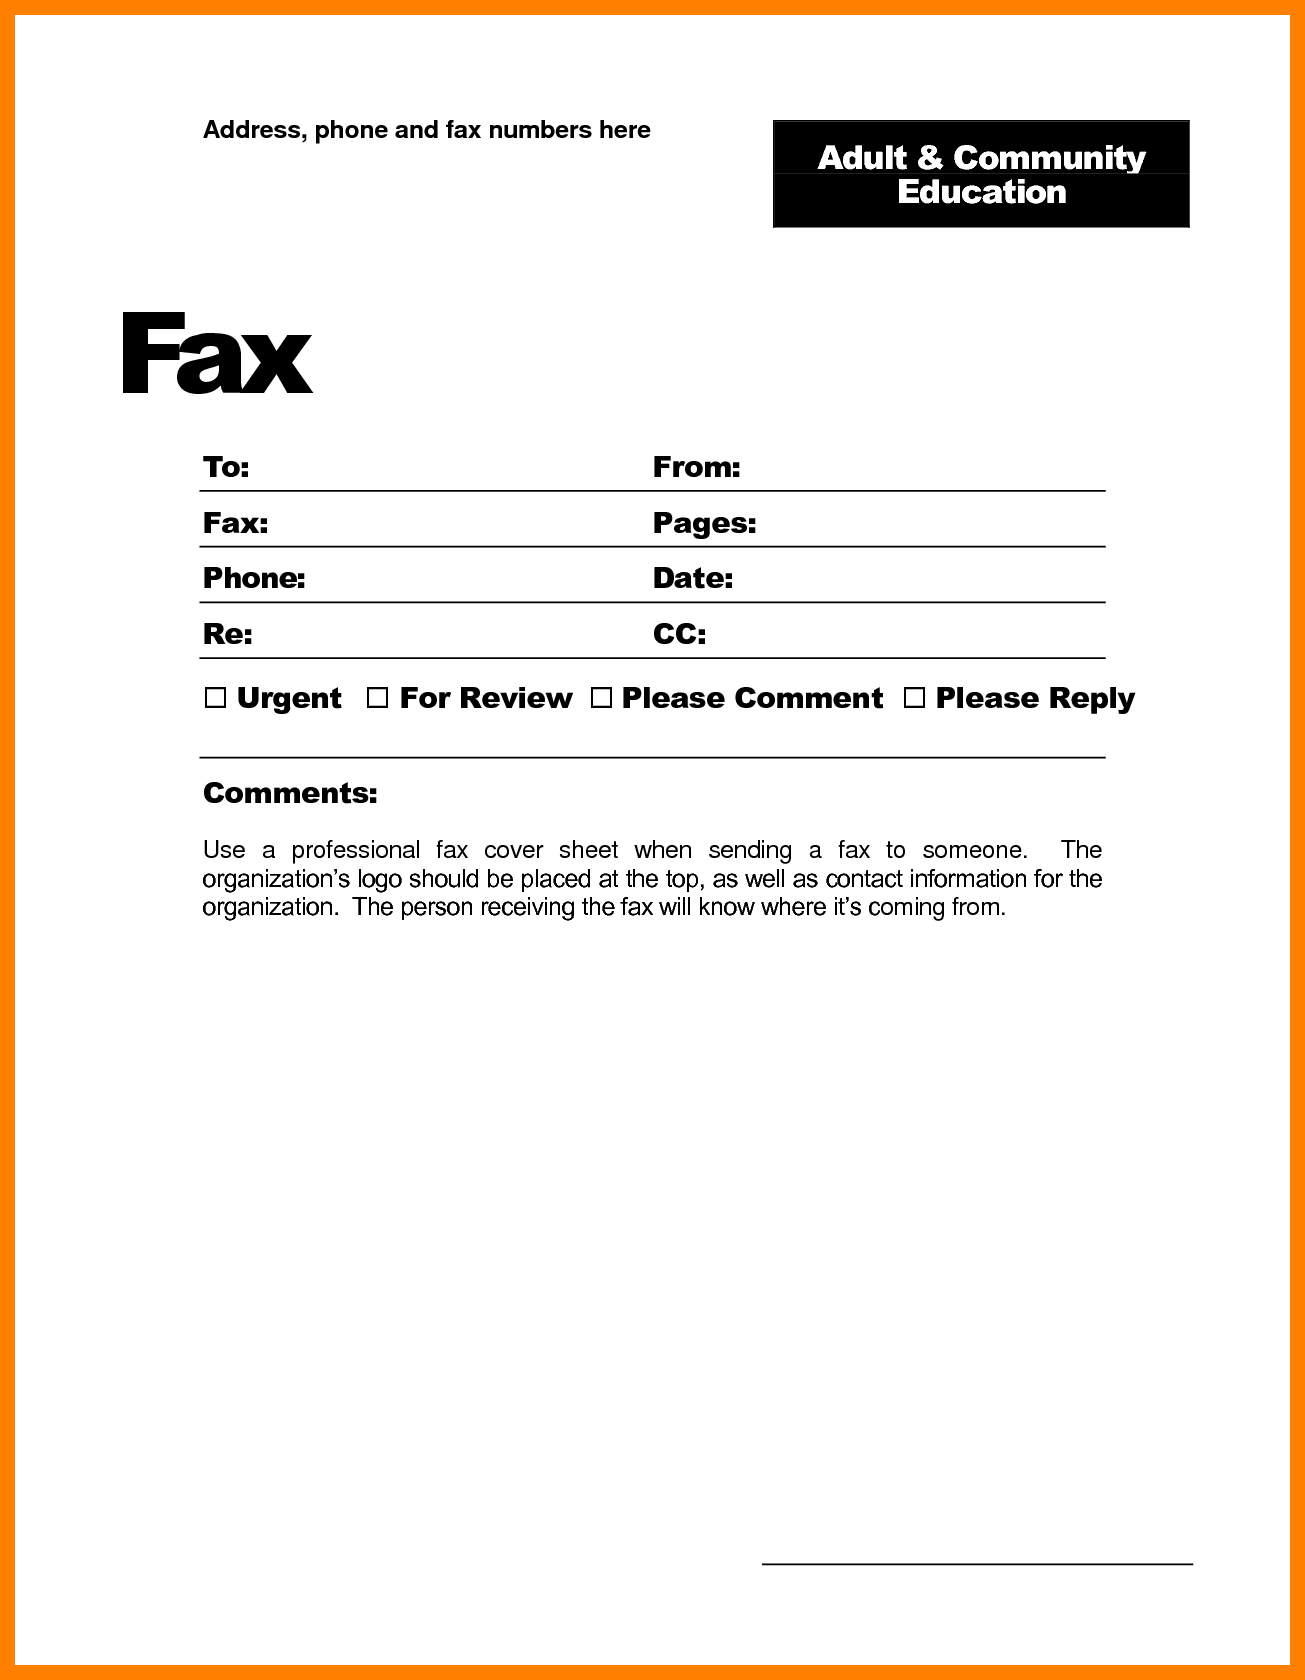 Free Printable Fax Cover Sheet